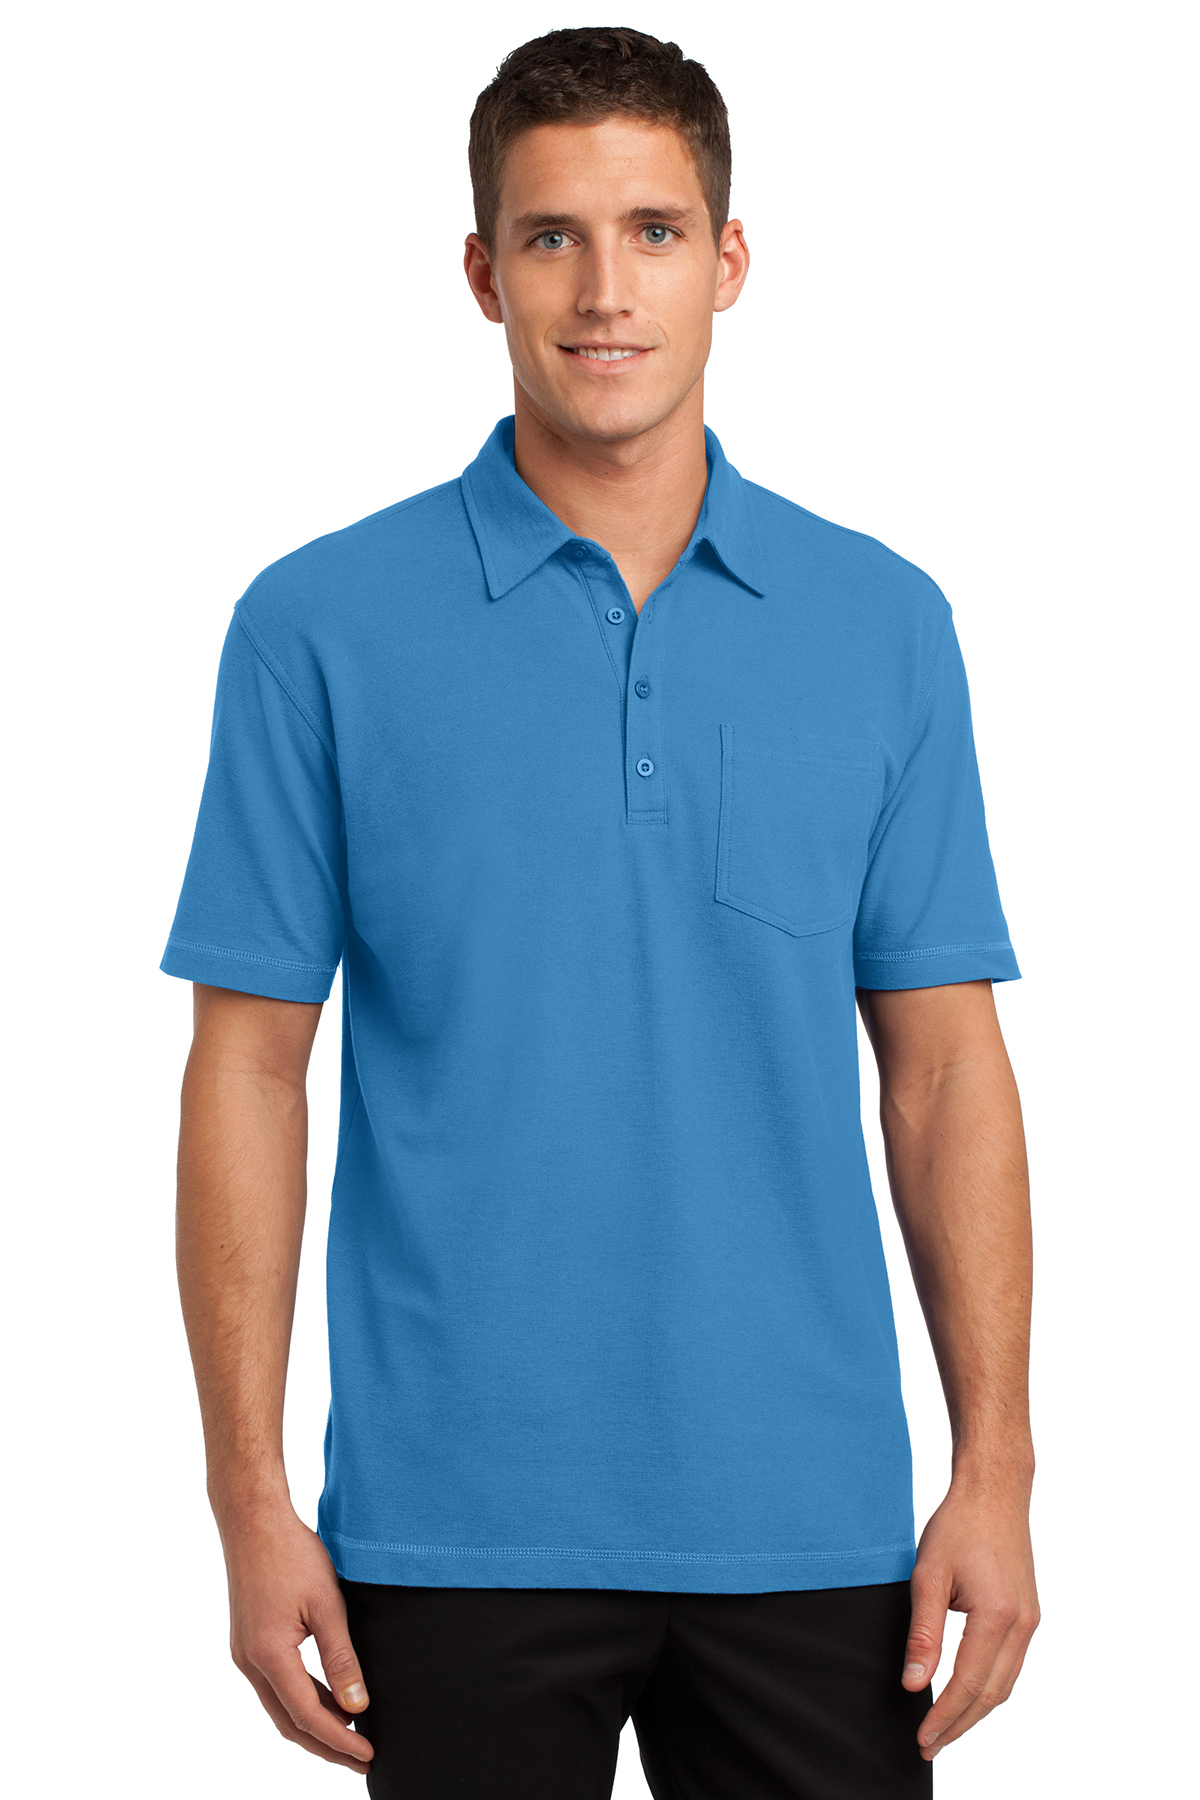 Port Authority Modern Stain-Resistant Pocket Polo | Product | SanMar